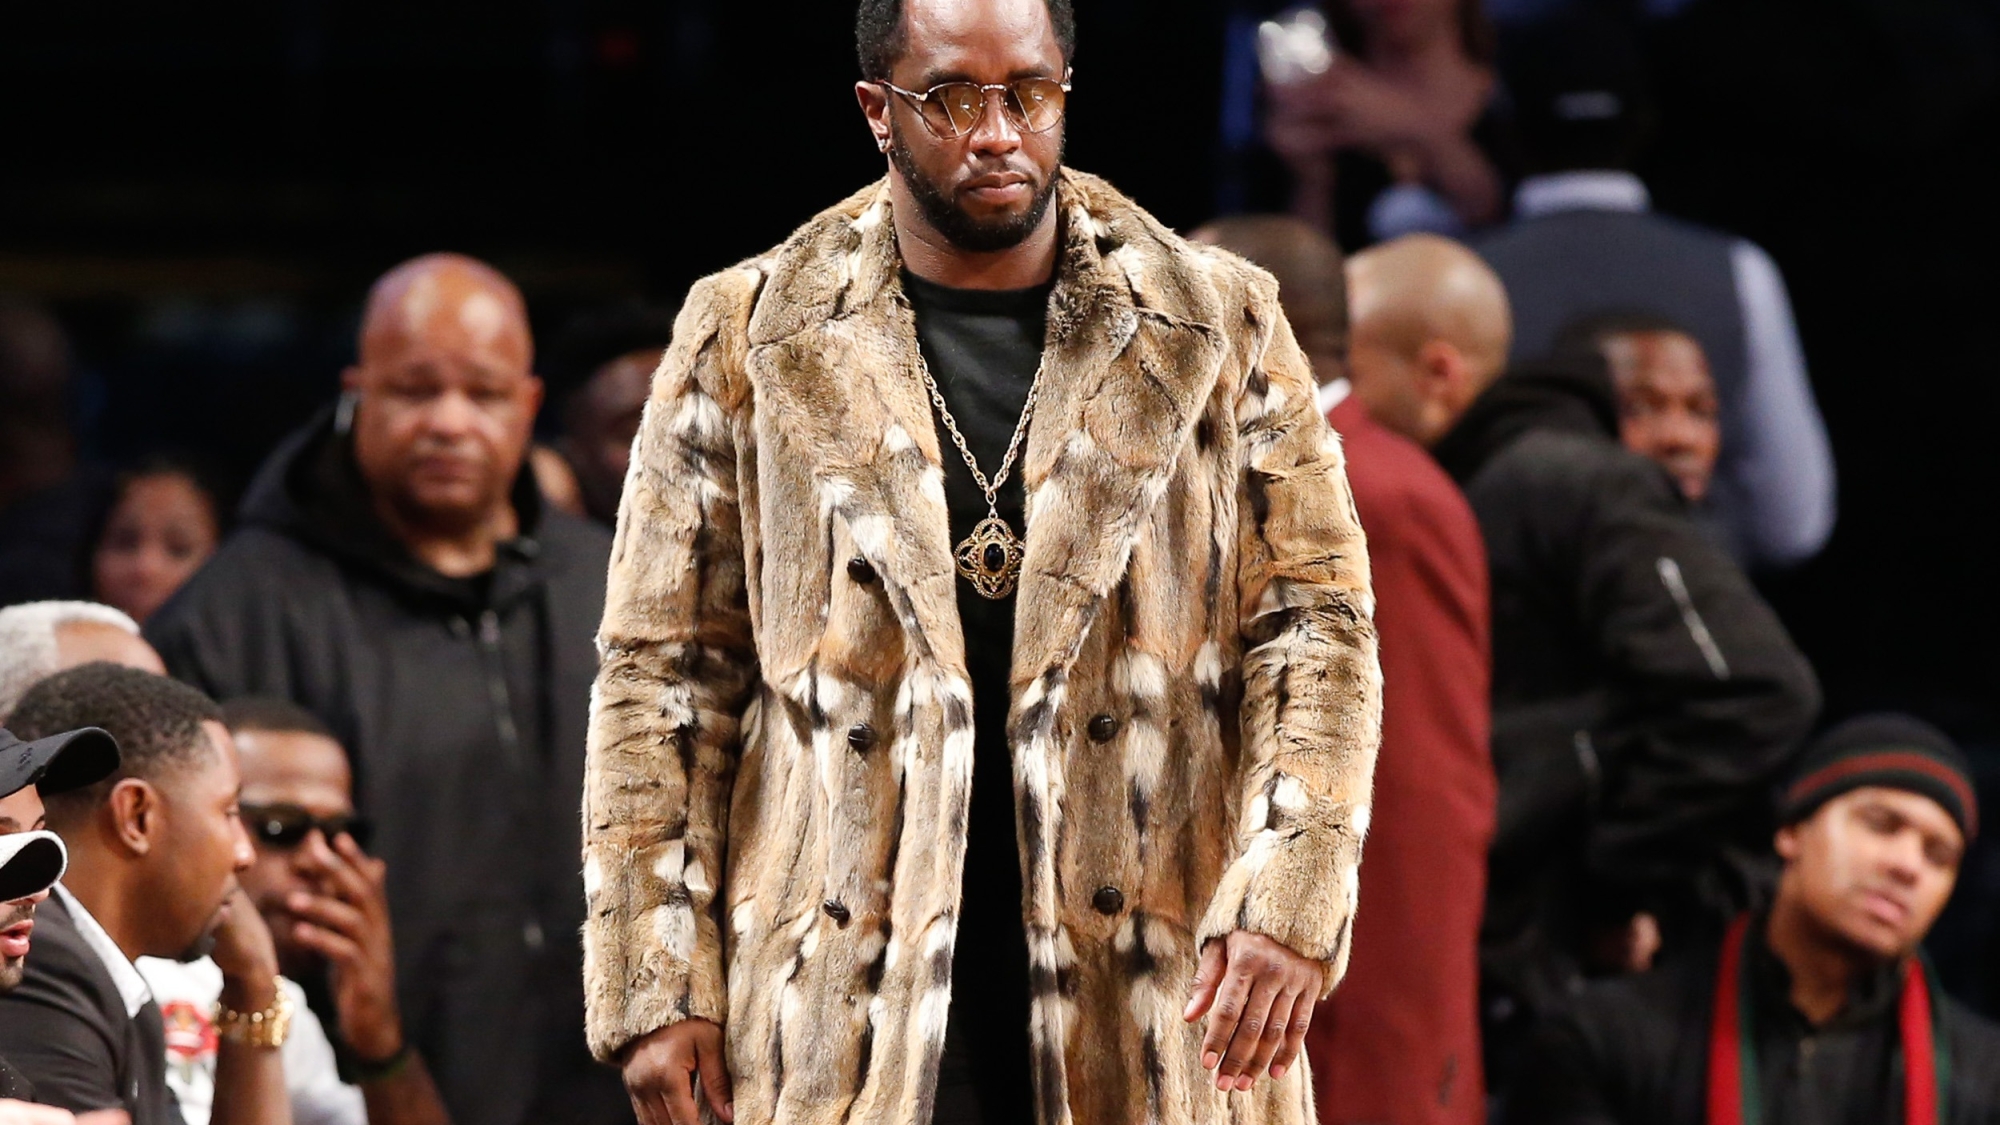 FILE - Sean "Diddy" Combs, wearing a fur coat, walks down the sideline during the second half of an NBA basketball game between the Brooklyn Nets and the New York Knicks, Sunday, March 12, 2017, in New York. Combs' lawyer said Tuesday, March 26, 2024, that the searches of his Los Angeles and Miami properties by federal authorities in a sex-trafficking investigation were ”a gross use of military-level force" and that Combs is “innocent and will continue to fight" to clear his name.  (AP Photo/Kathy Willens, File)